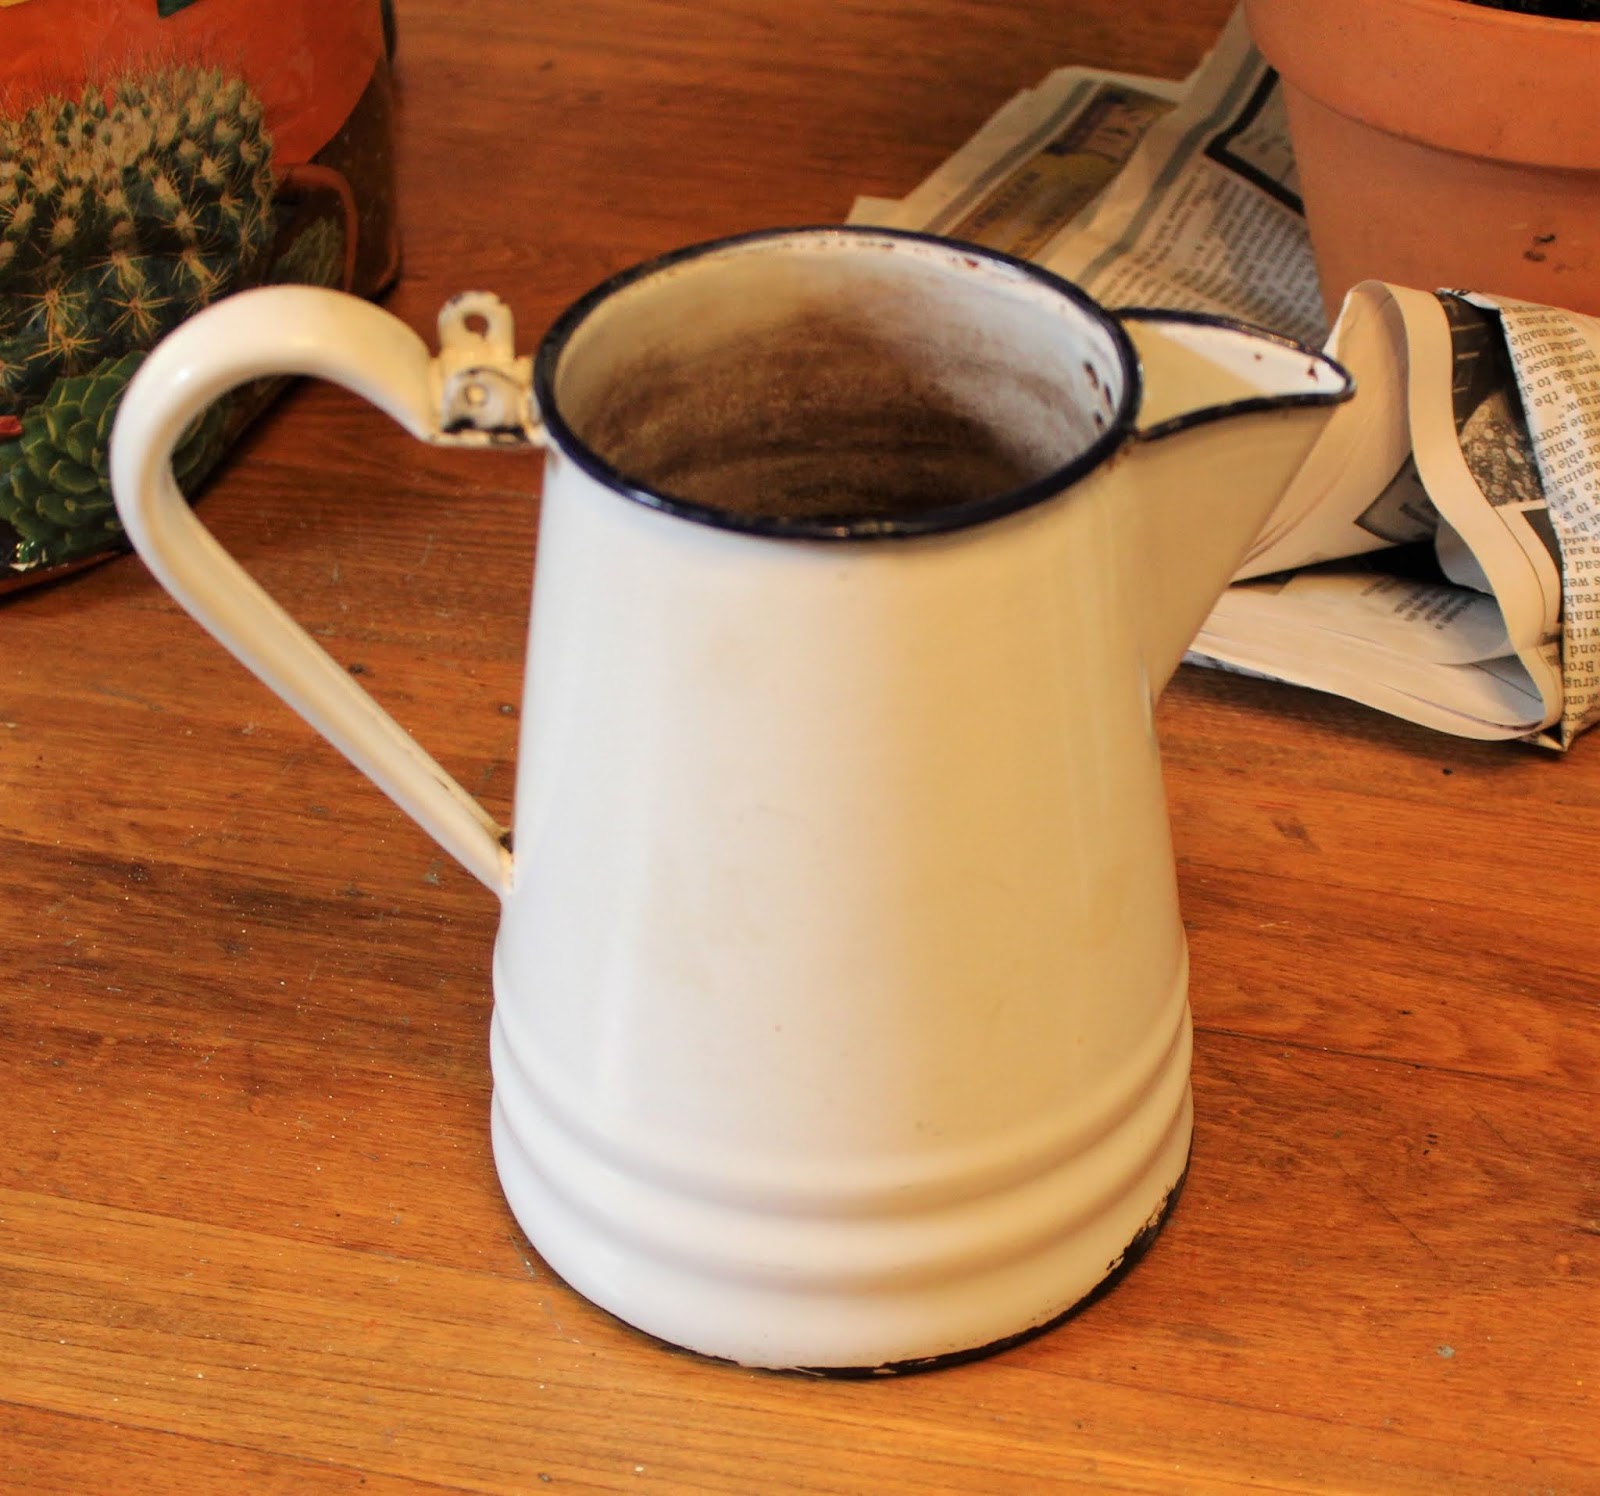 Upcycled Vintage Coffee Pot and Enamelware Decor Ideas - Organized